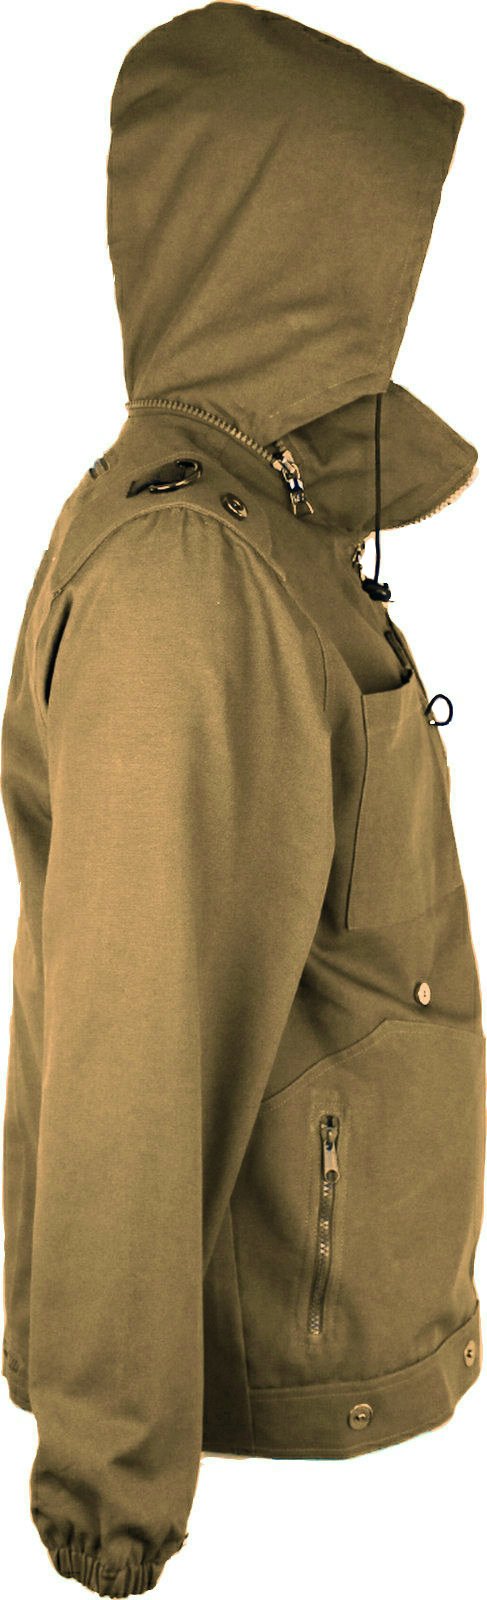 Cotton Canvas Jacket Convertible to Carry-On Backpack Travel Outdoor Camping Fishing Khaki / 2XL